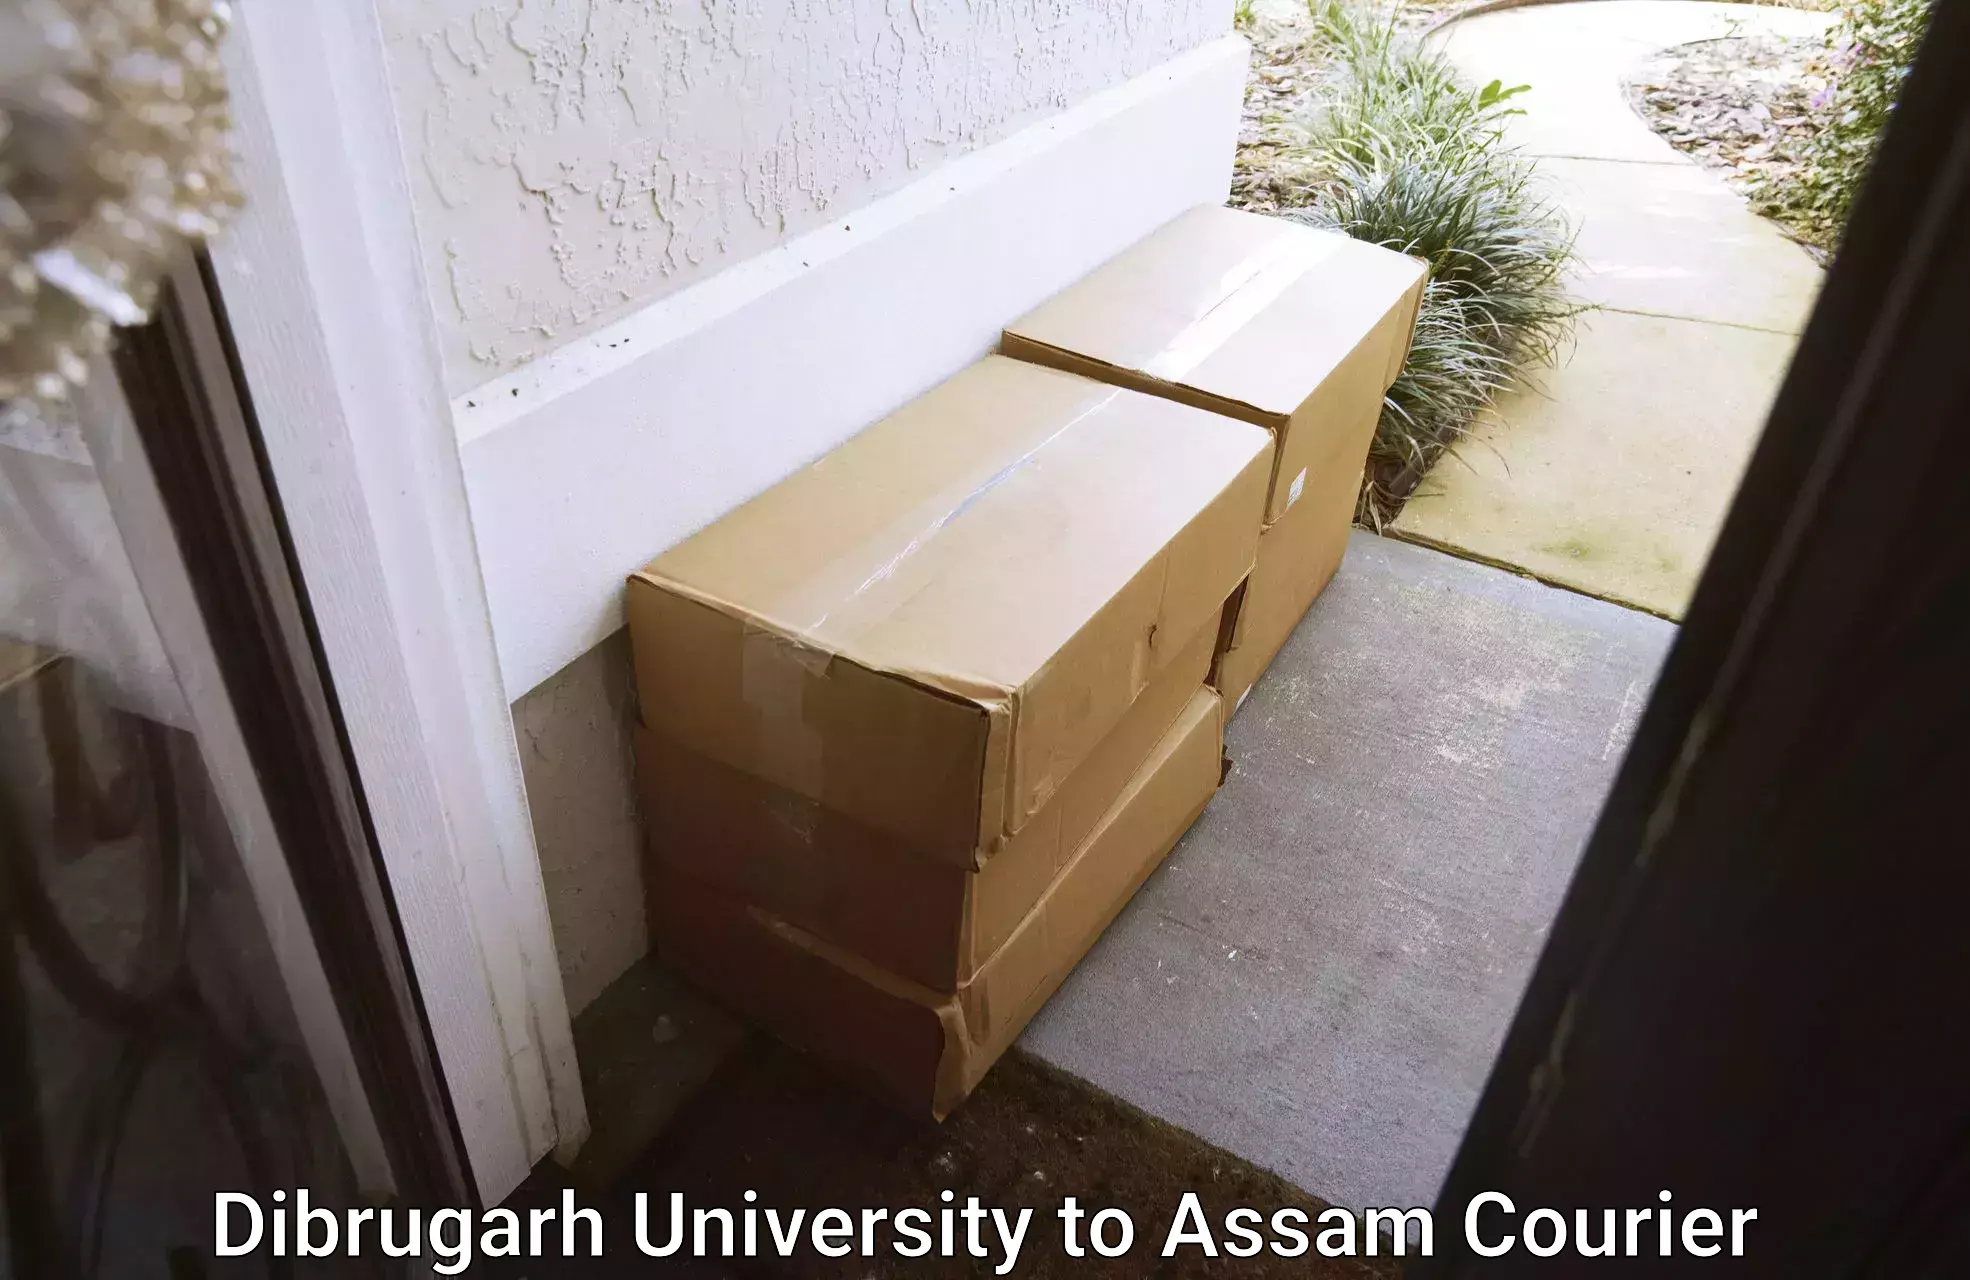 Next-day delivery options Dibrugarh University to Bokakhat